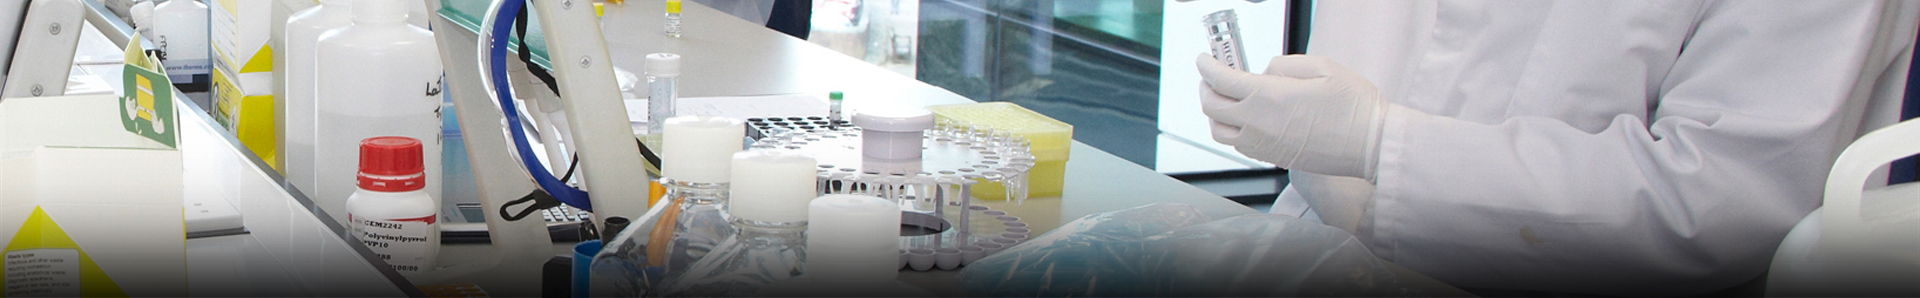 Lab vials for hplc & autosampler along with HPLC is available @ SGM Lab Solutions.